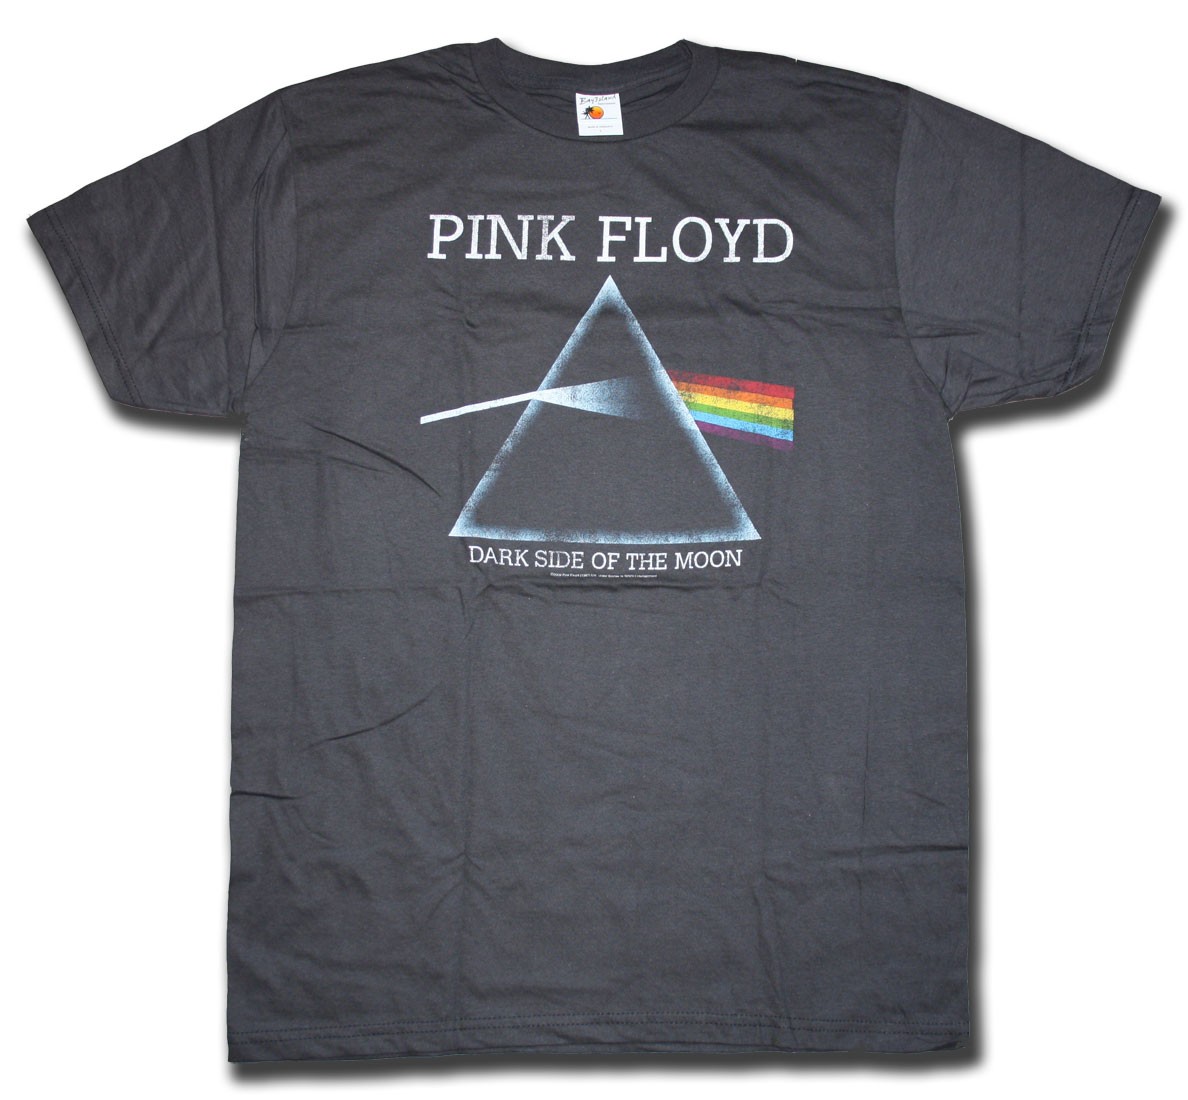 Pink Floyd prism design with rainbow on a grey tee on white background